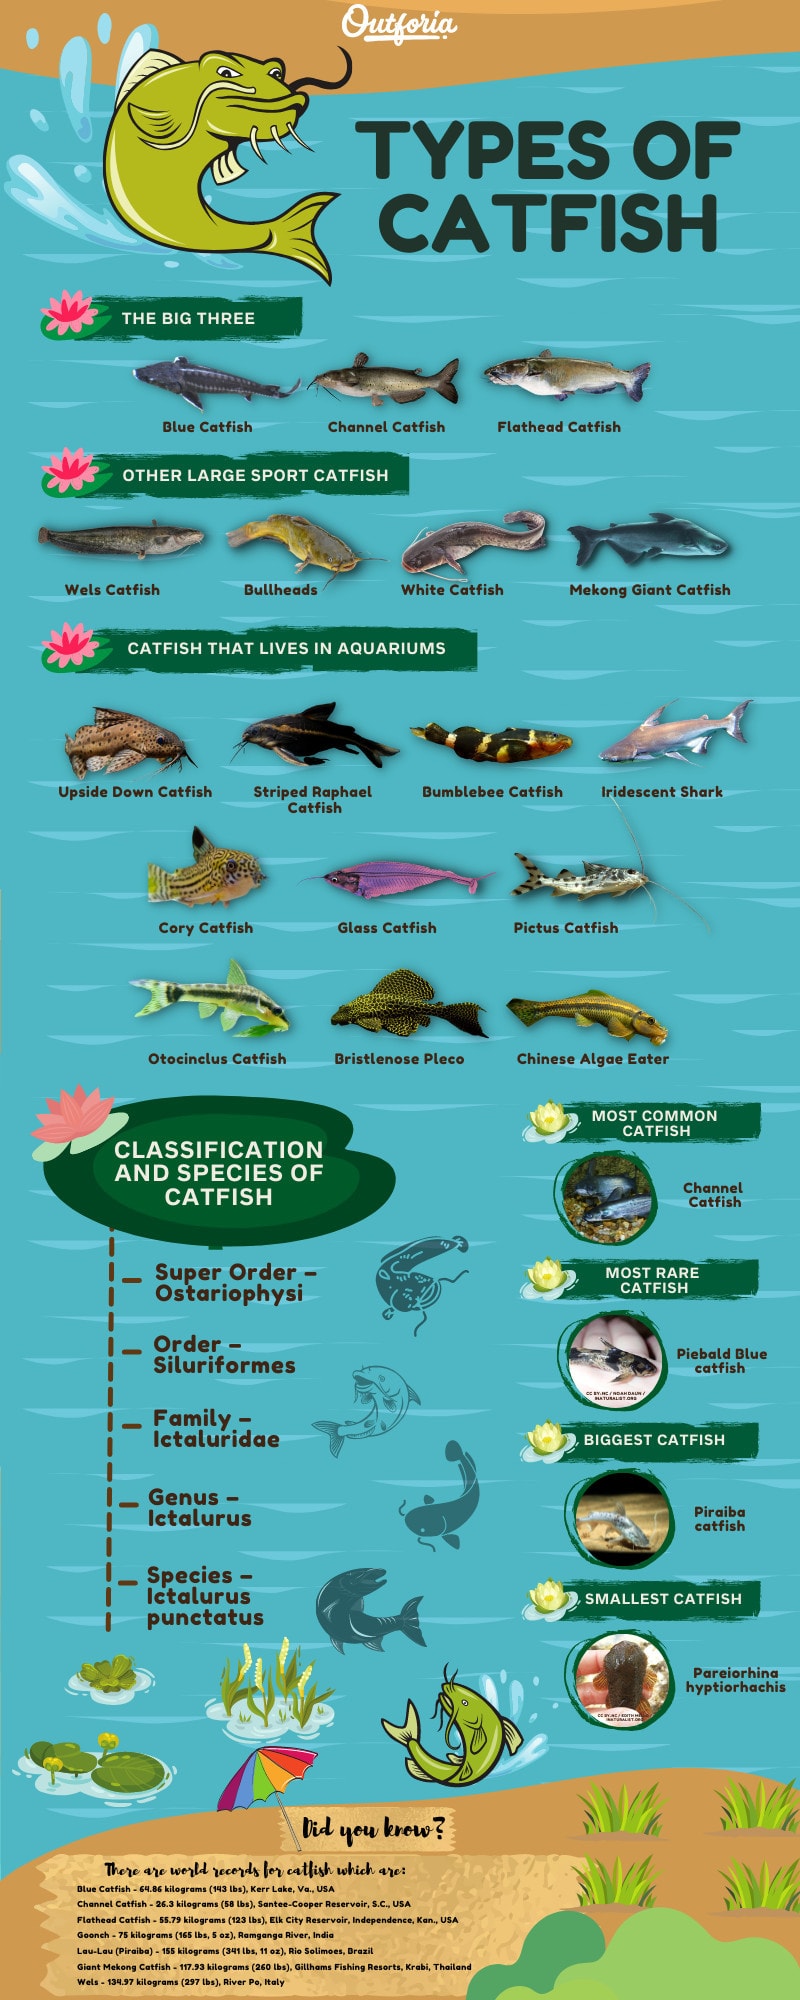 Types of catfish infographic with all different species and classification